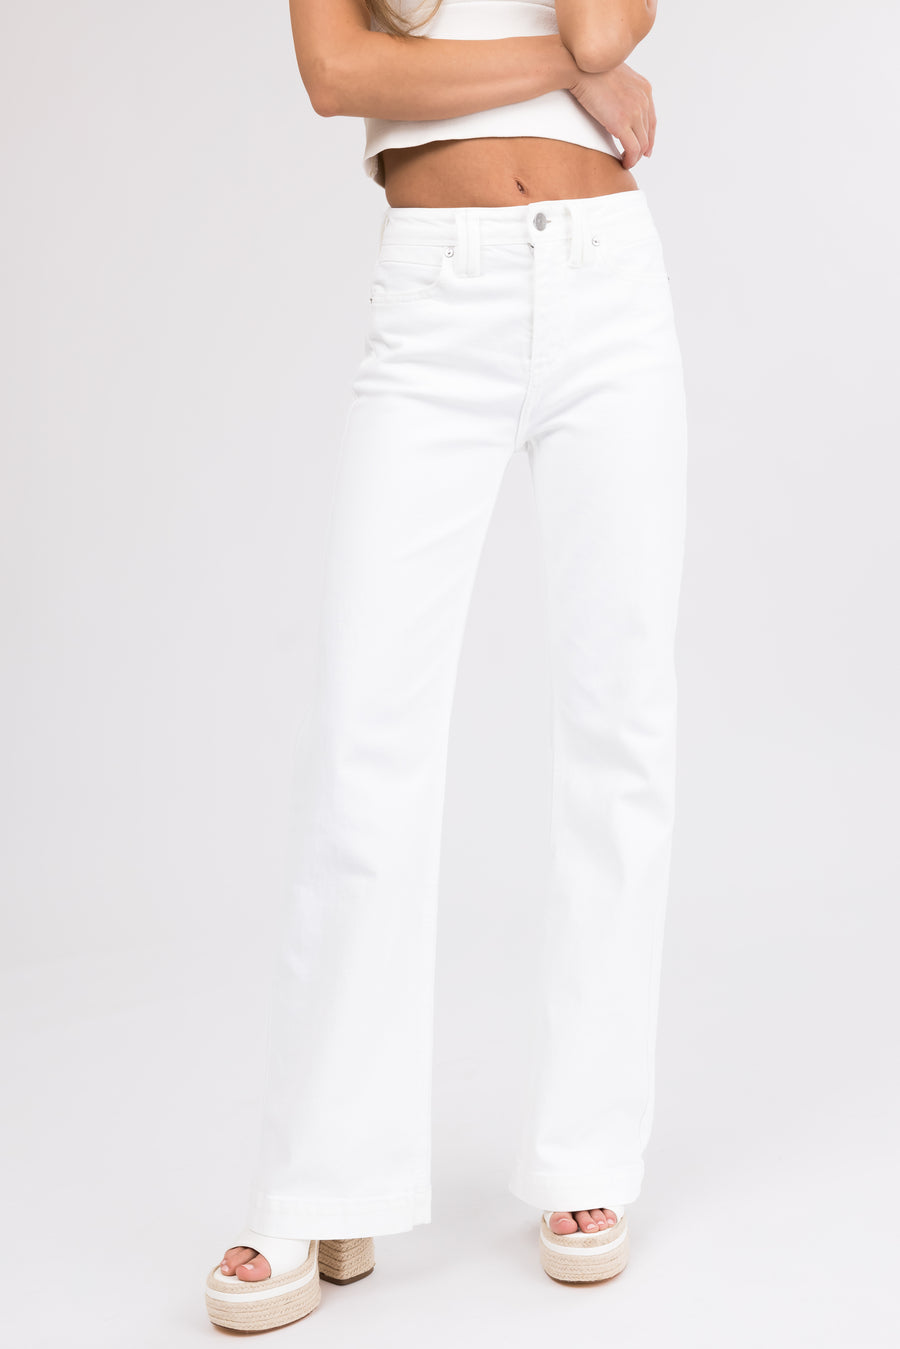 KanCan Ivory High Rise Wide Relaxed Denim Jeans